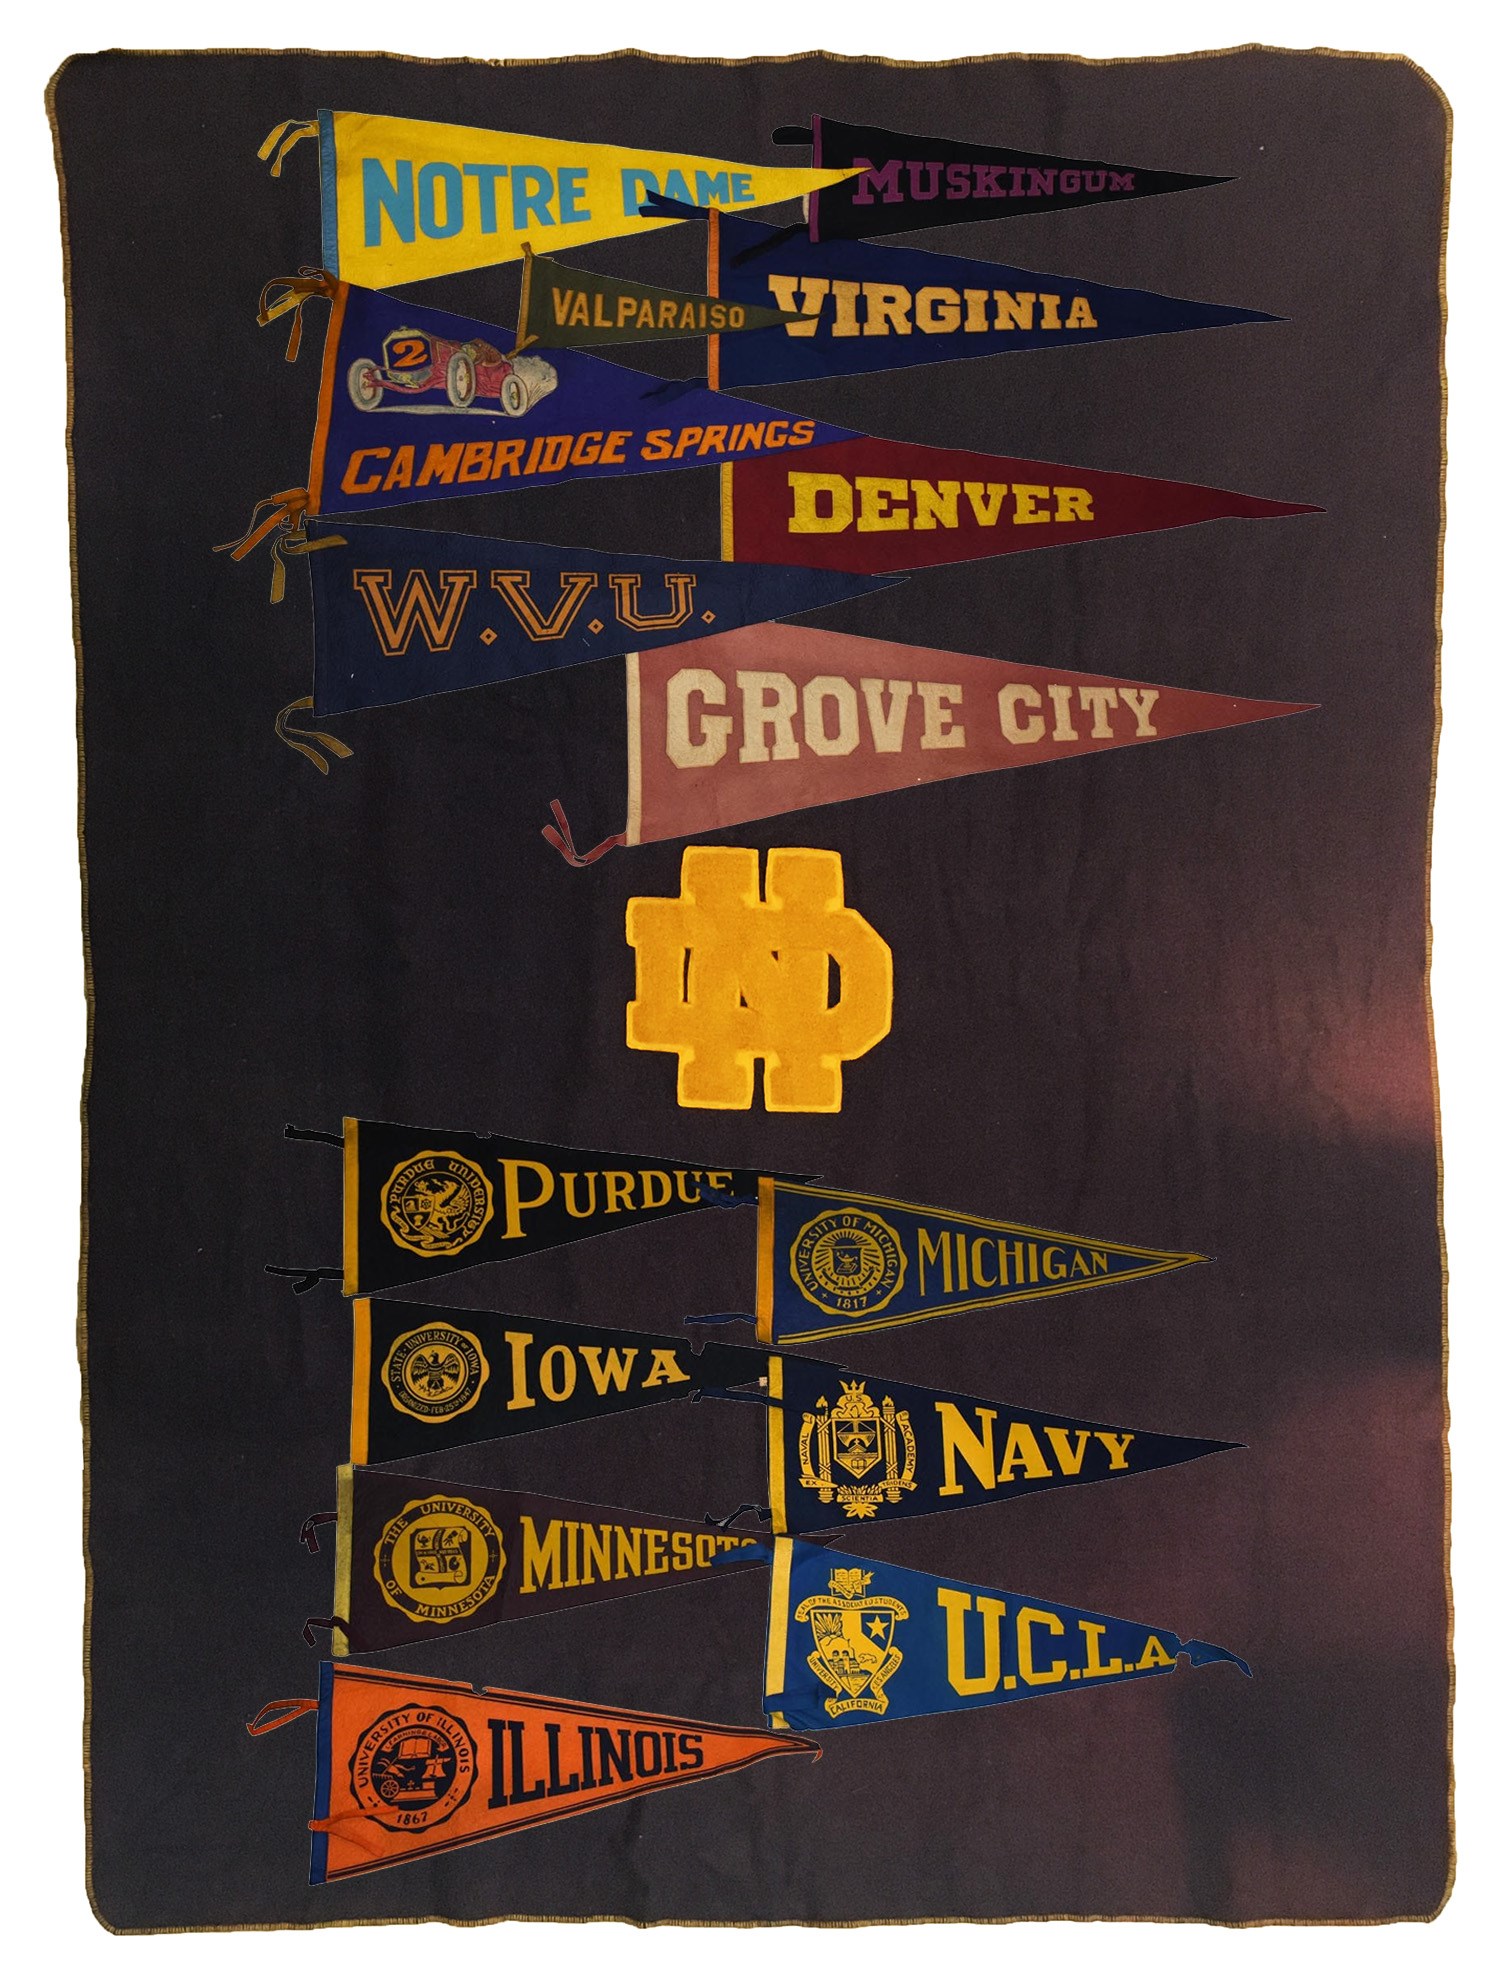 - Vintage College Pennant & Blanket Collection - Notre Dame, Michigan, Army, Navy (40+)